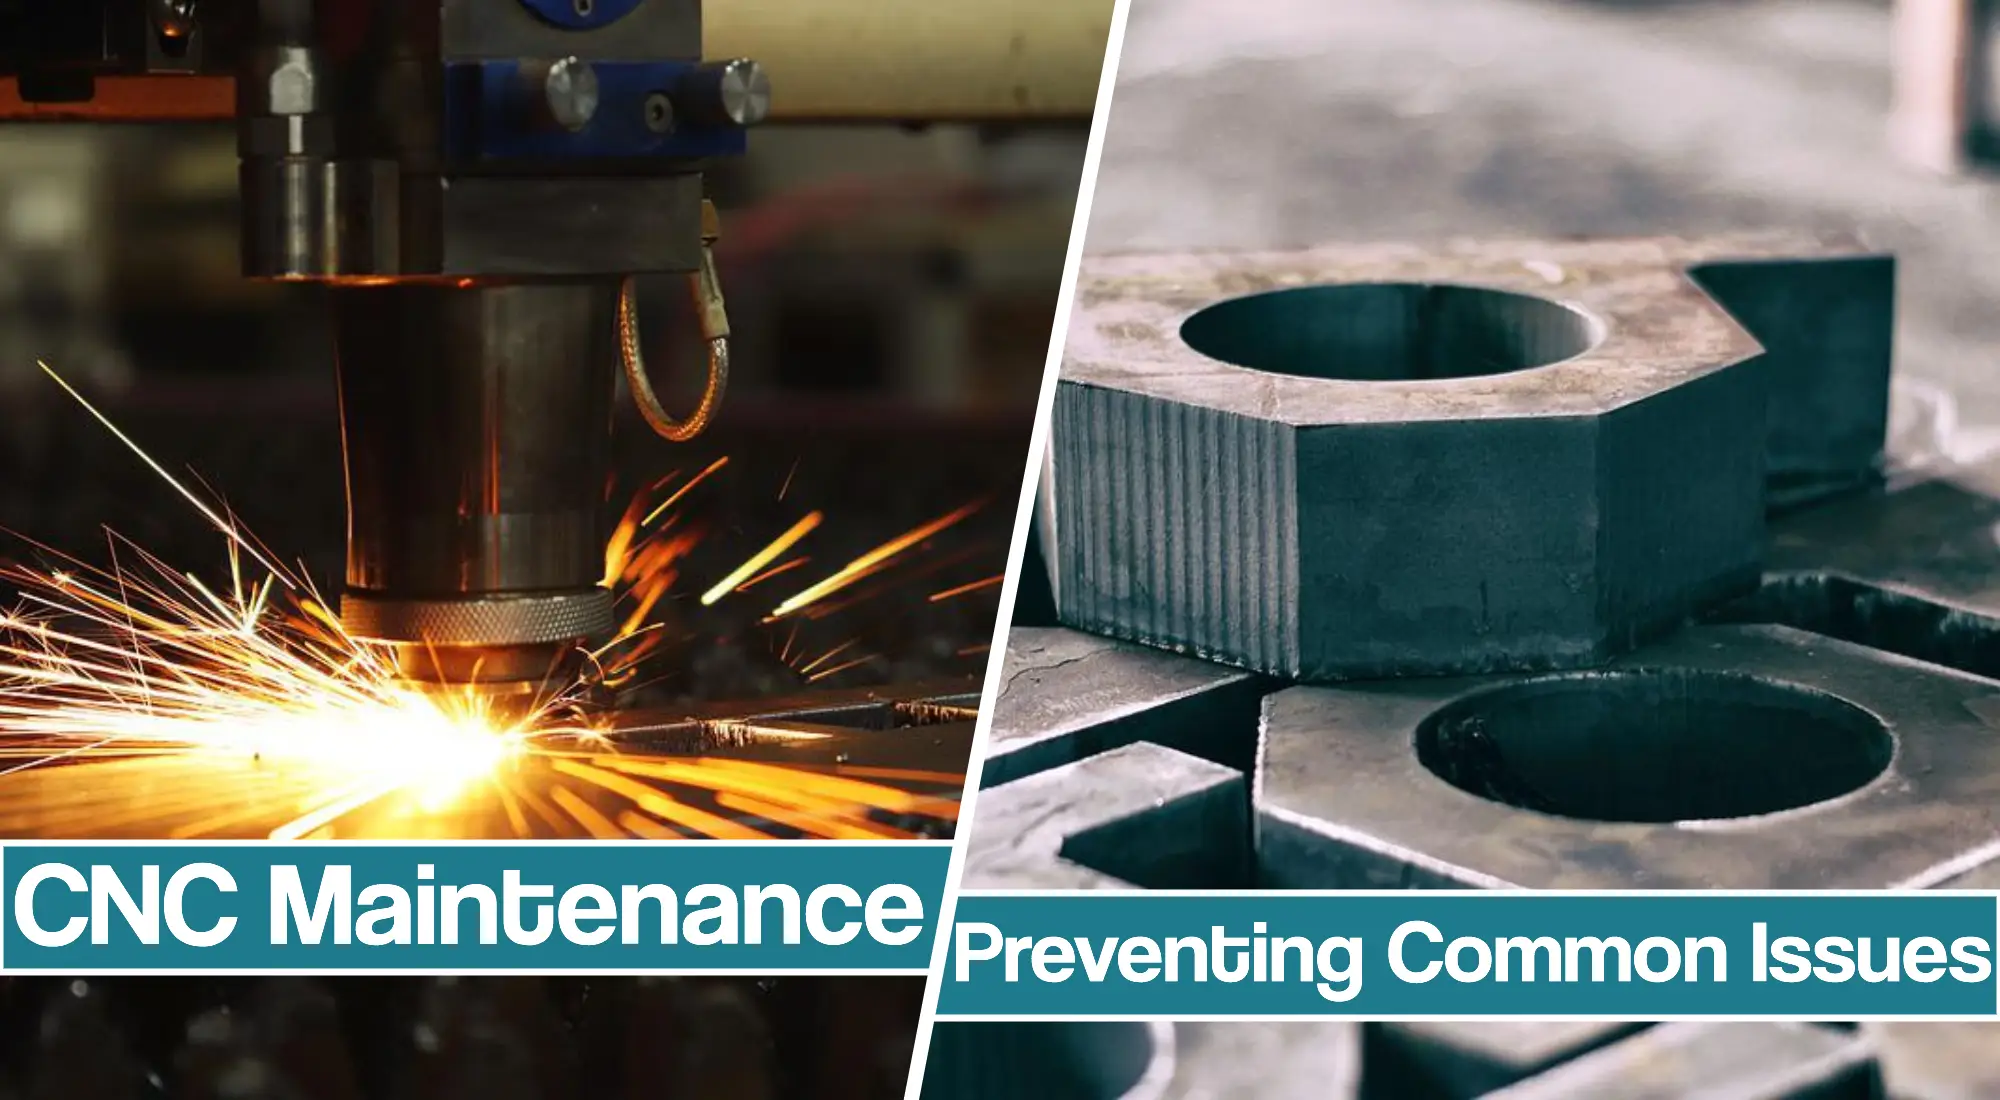 CNC Maintenance And Common Issues Prevention